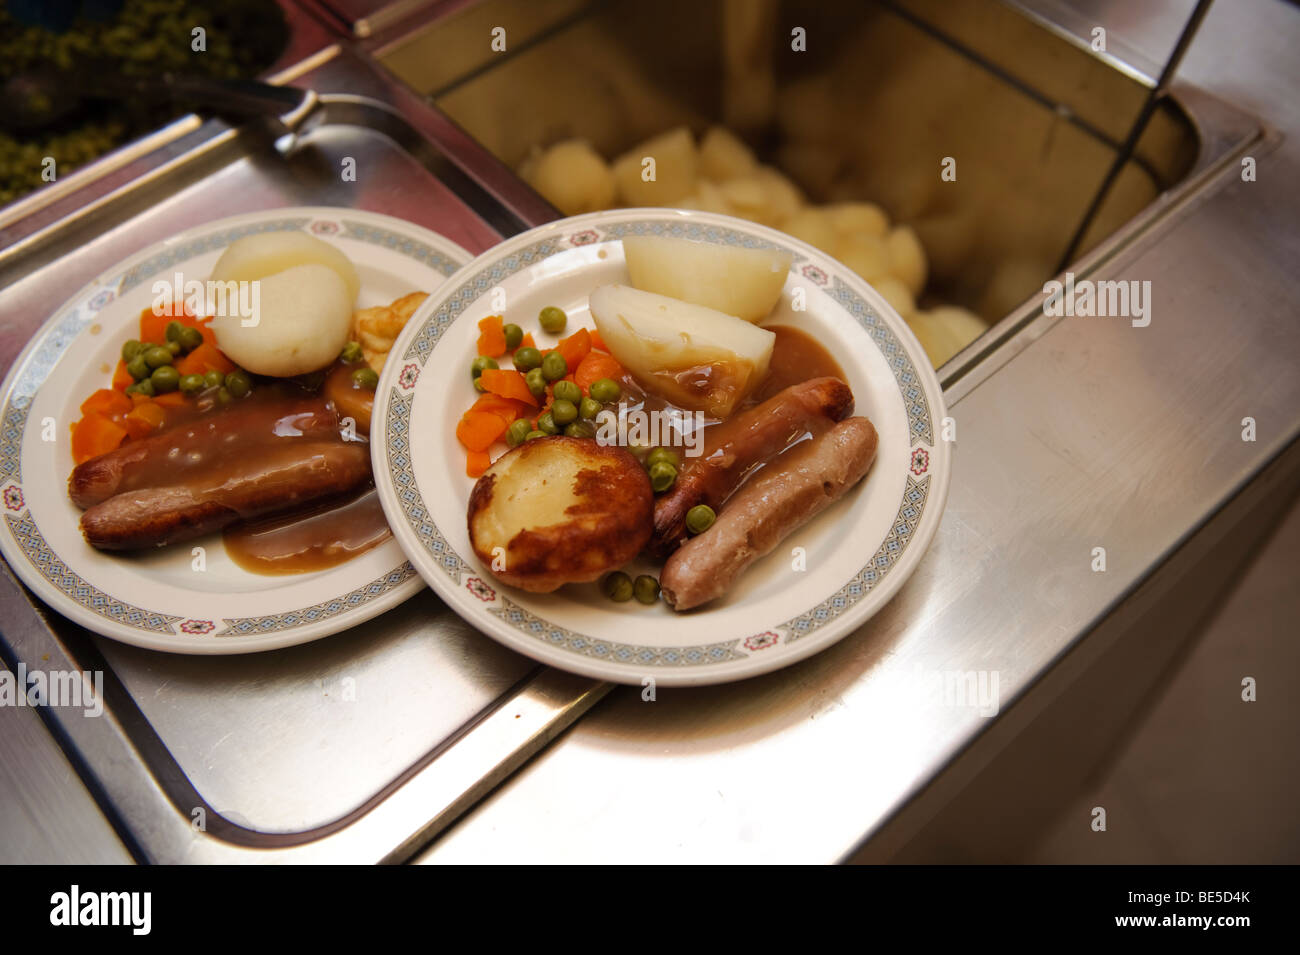 School dinners - sausage vegetables and potatoes -  served up on plates in a primary school canteen hall, Wales UK Stock Photo